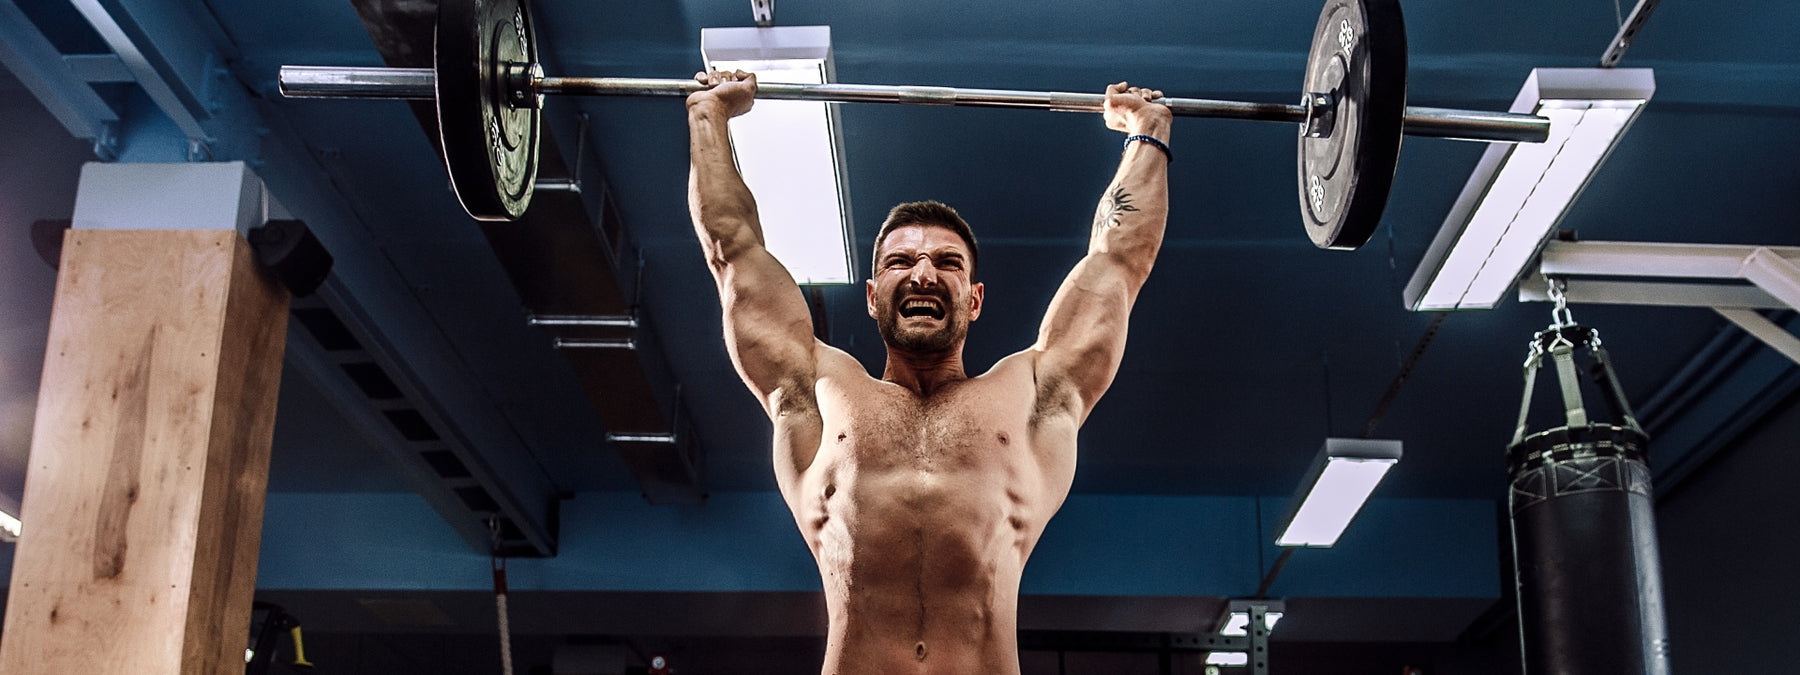 Strength Training: The Missing Muscle Building Key?